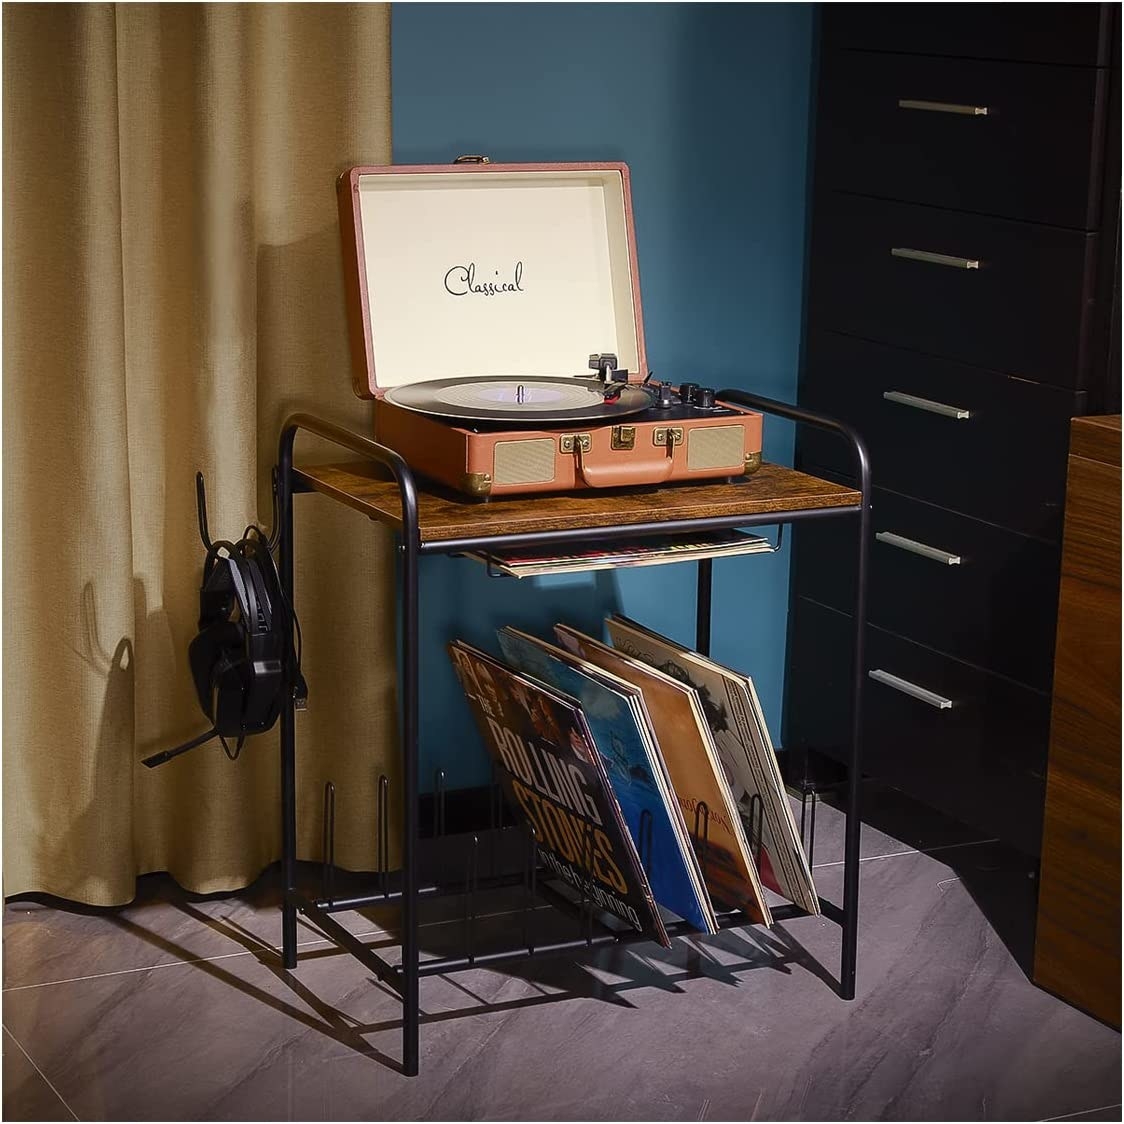 The record player stand with several albums, a player, and headphones on it